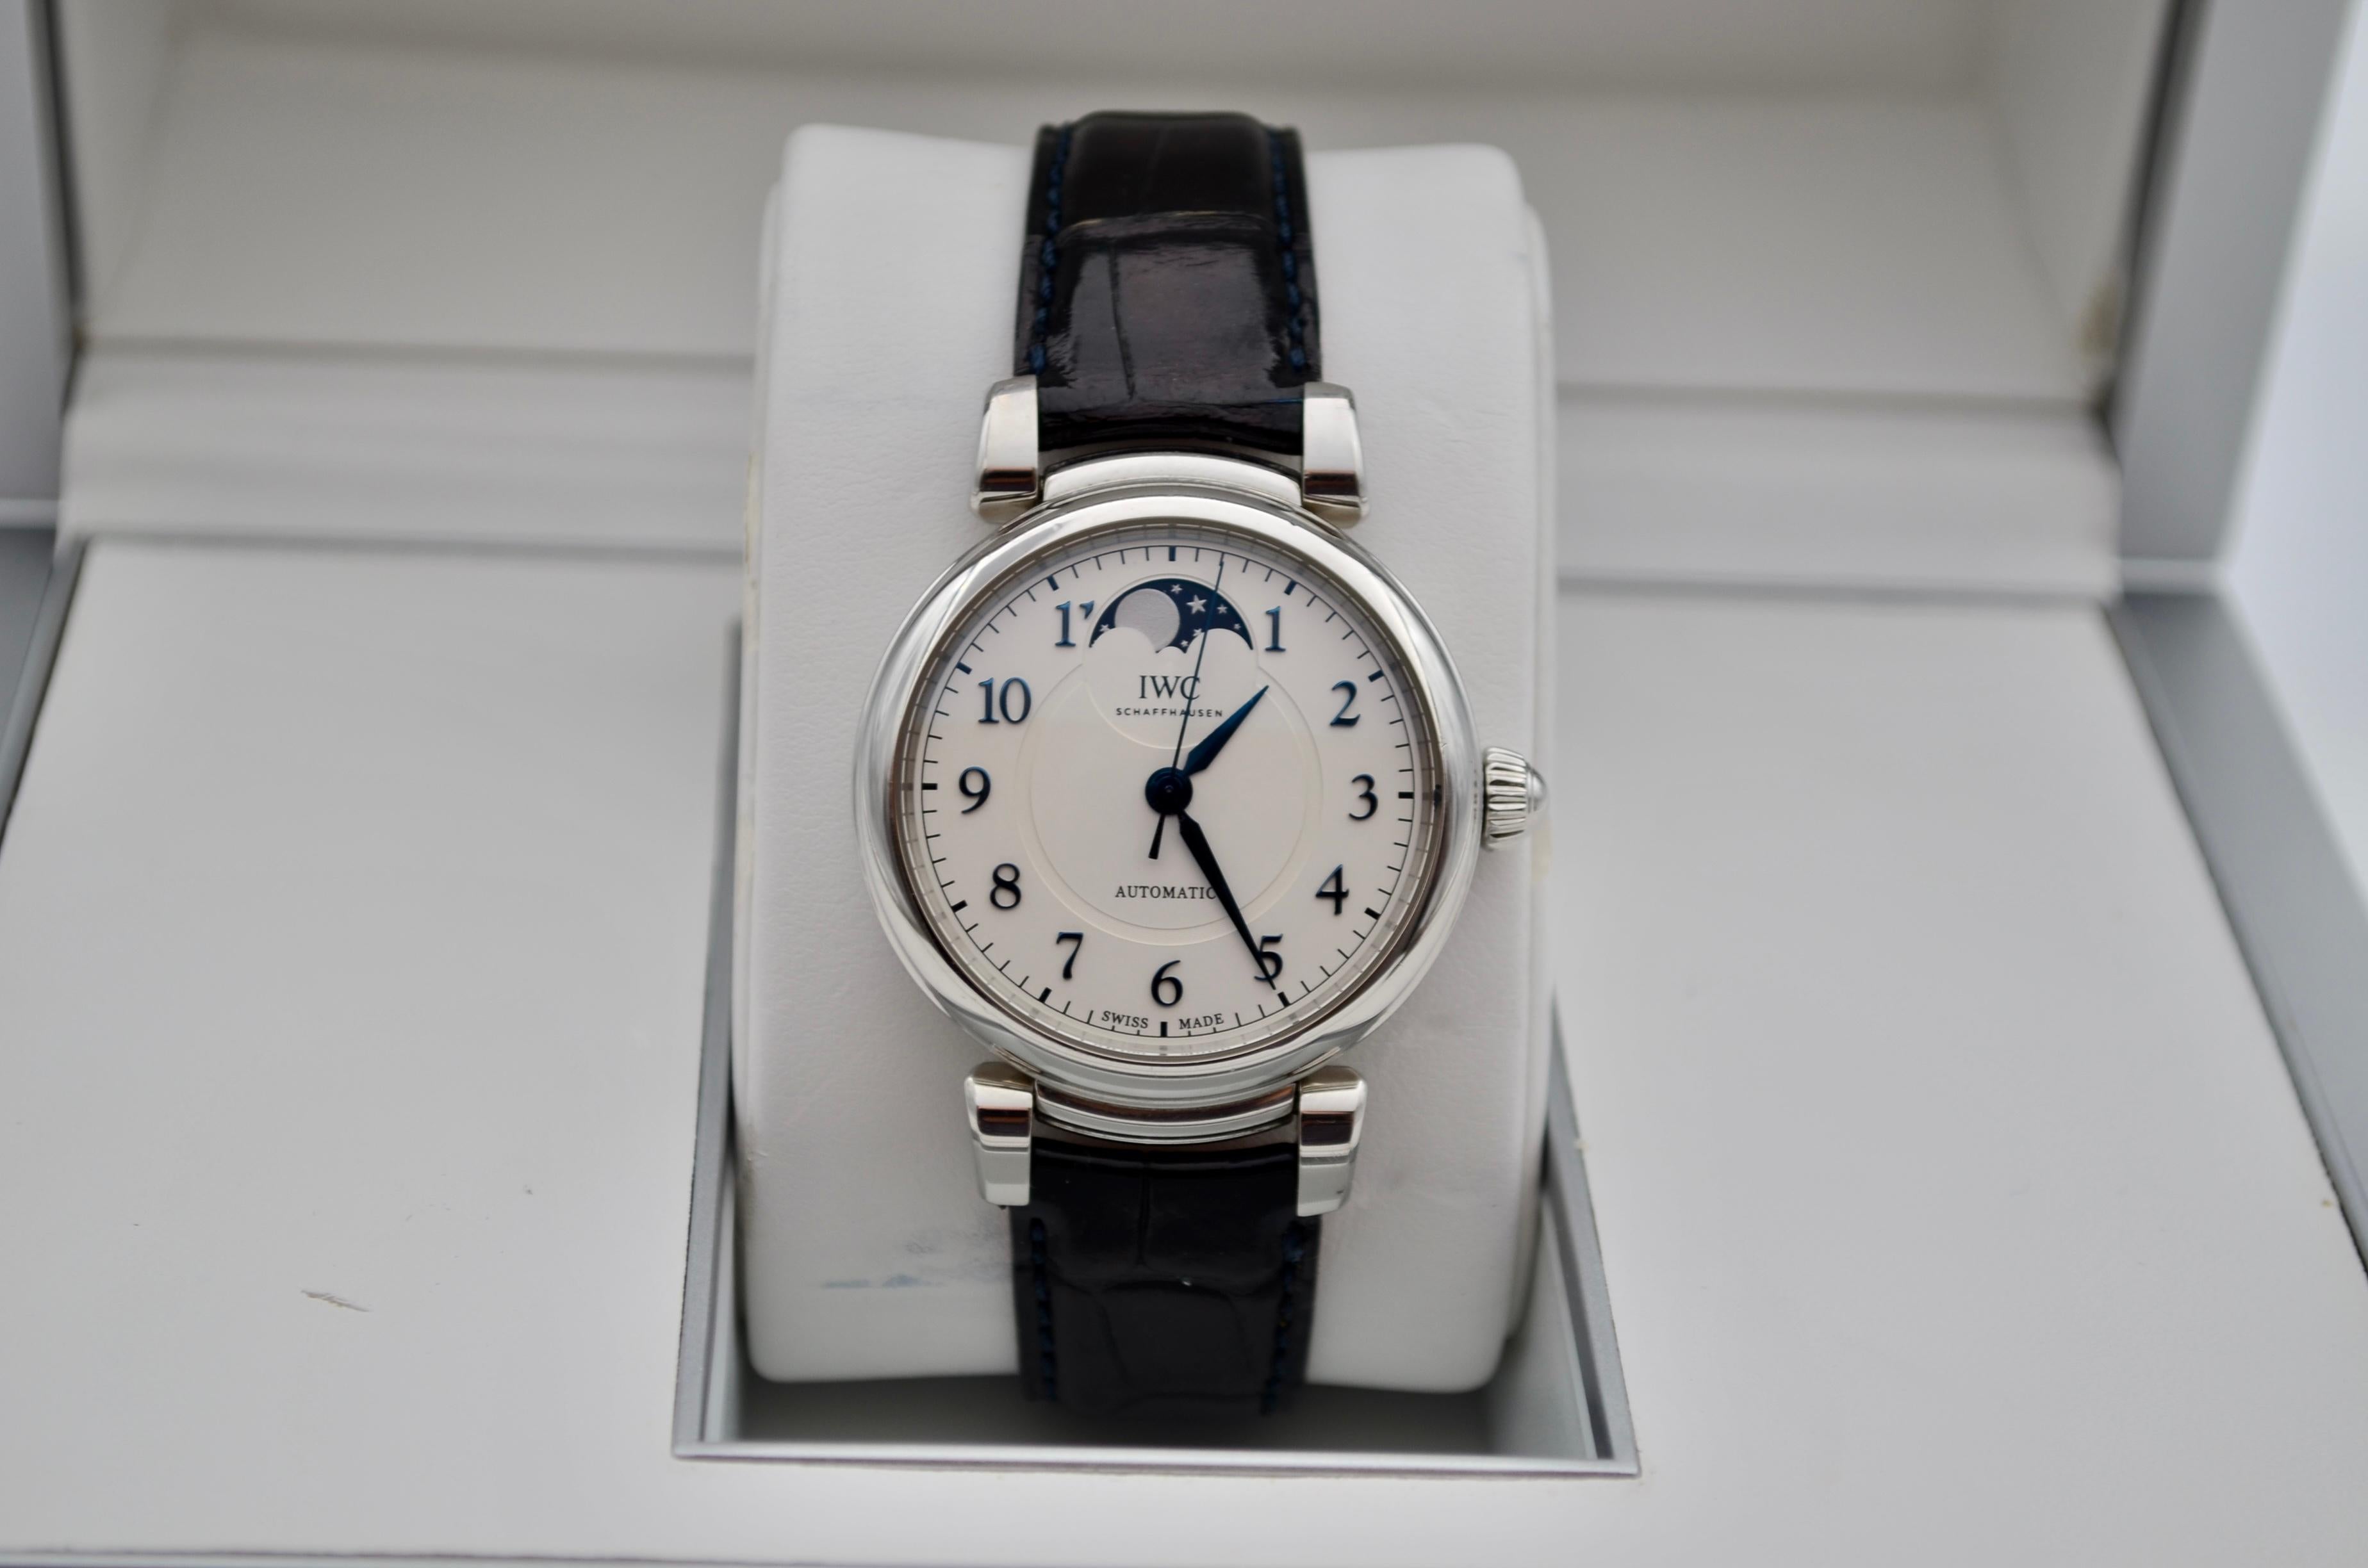 The watch is in a very good condition and it’s working well. The box is sticky. The watch comes with the original box and documents, along with an AGS Jewelry warranty card.  The IWC Da Vinci Moonphase 36mm Steel, reference number IW459306, is an